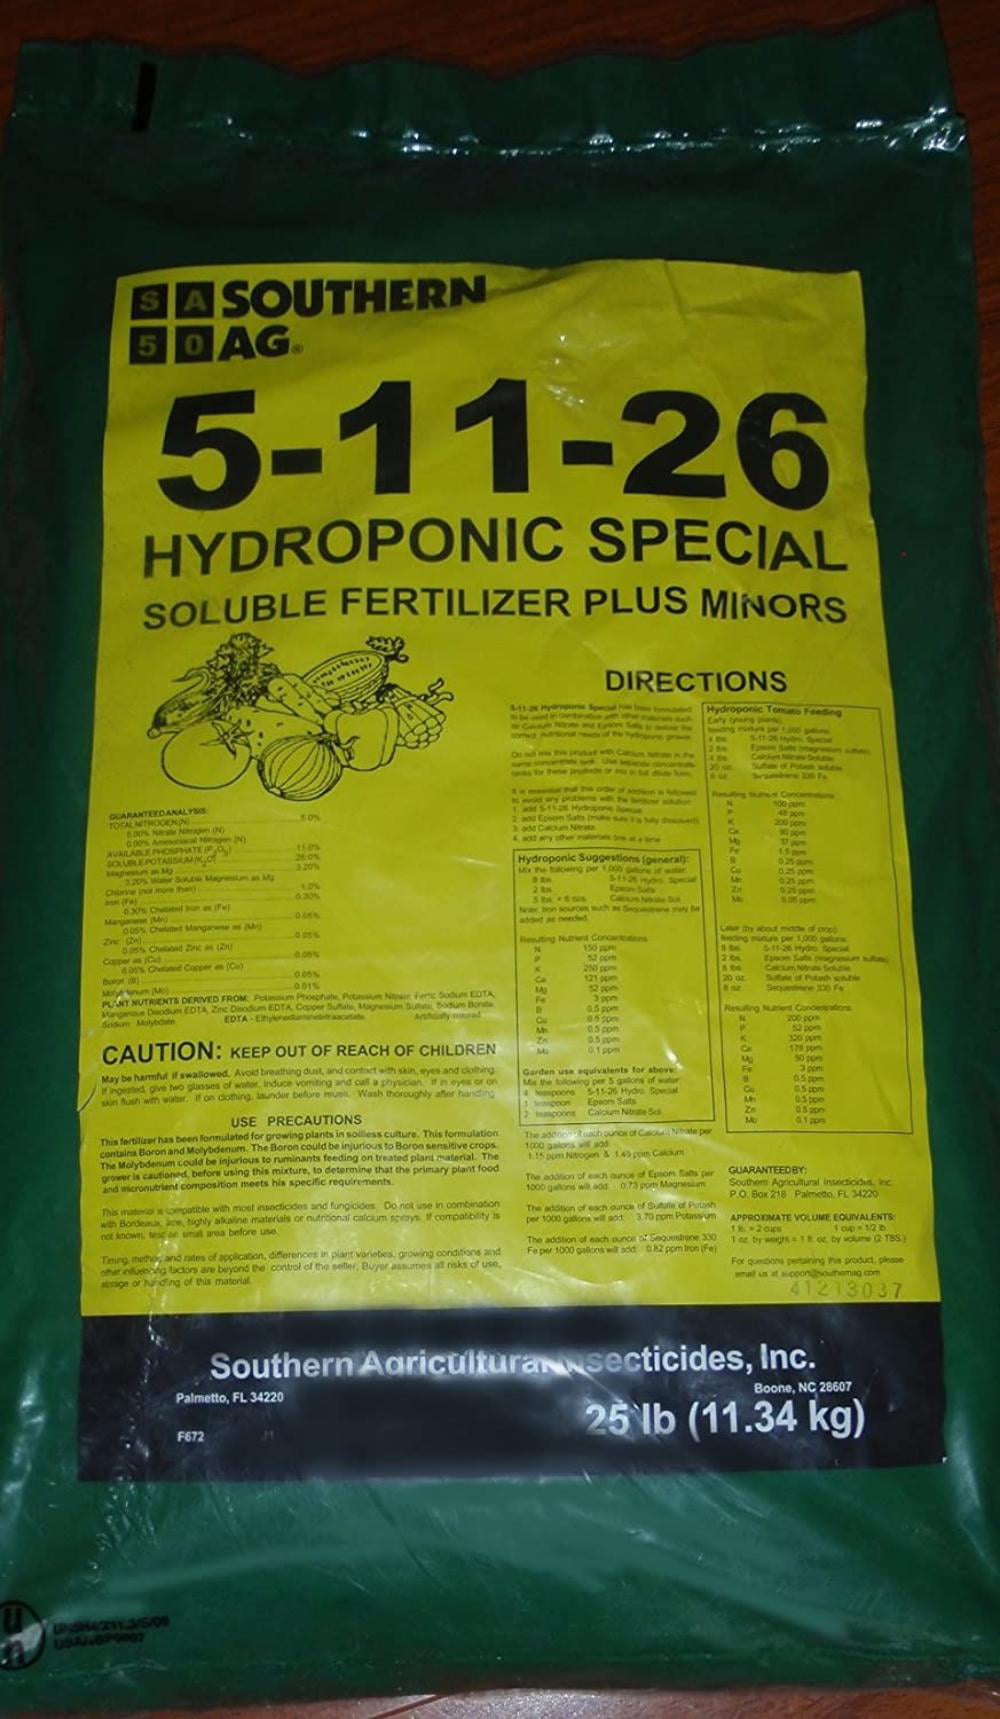 Bag Soluble Fertilizer Plus Minors Southern Ag 5-11-26 Hydroponic Special 25 lb 